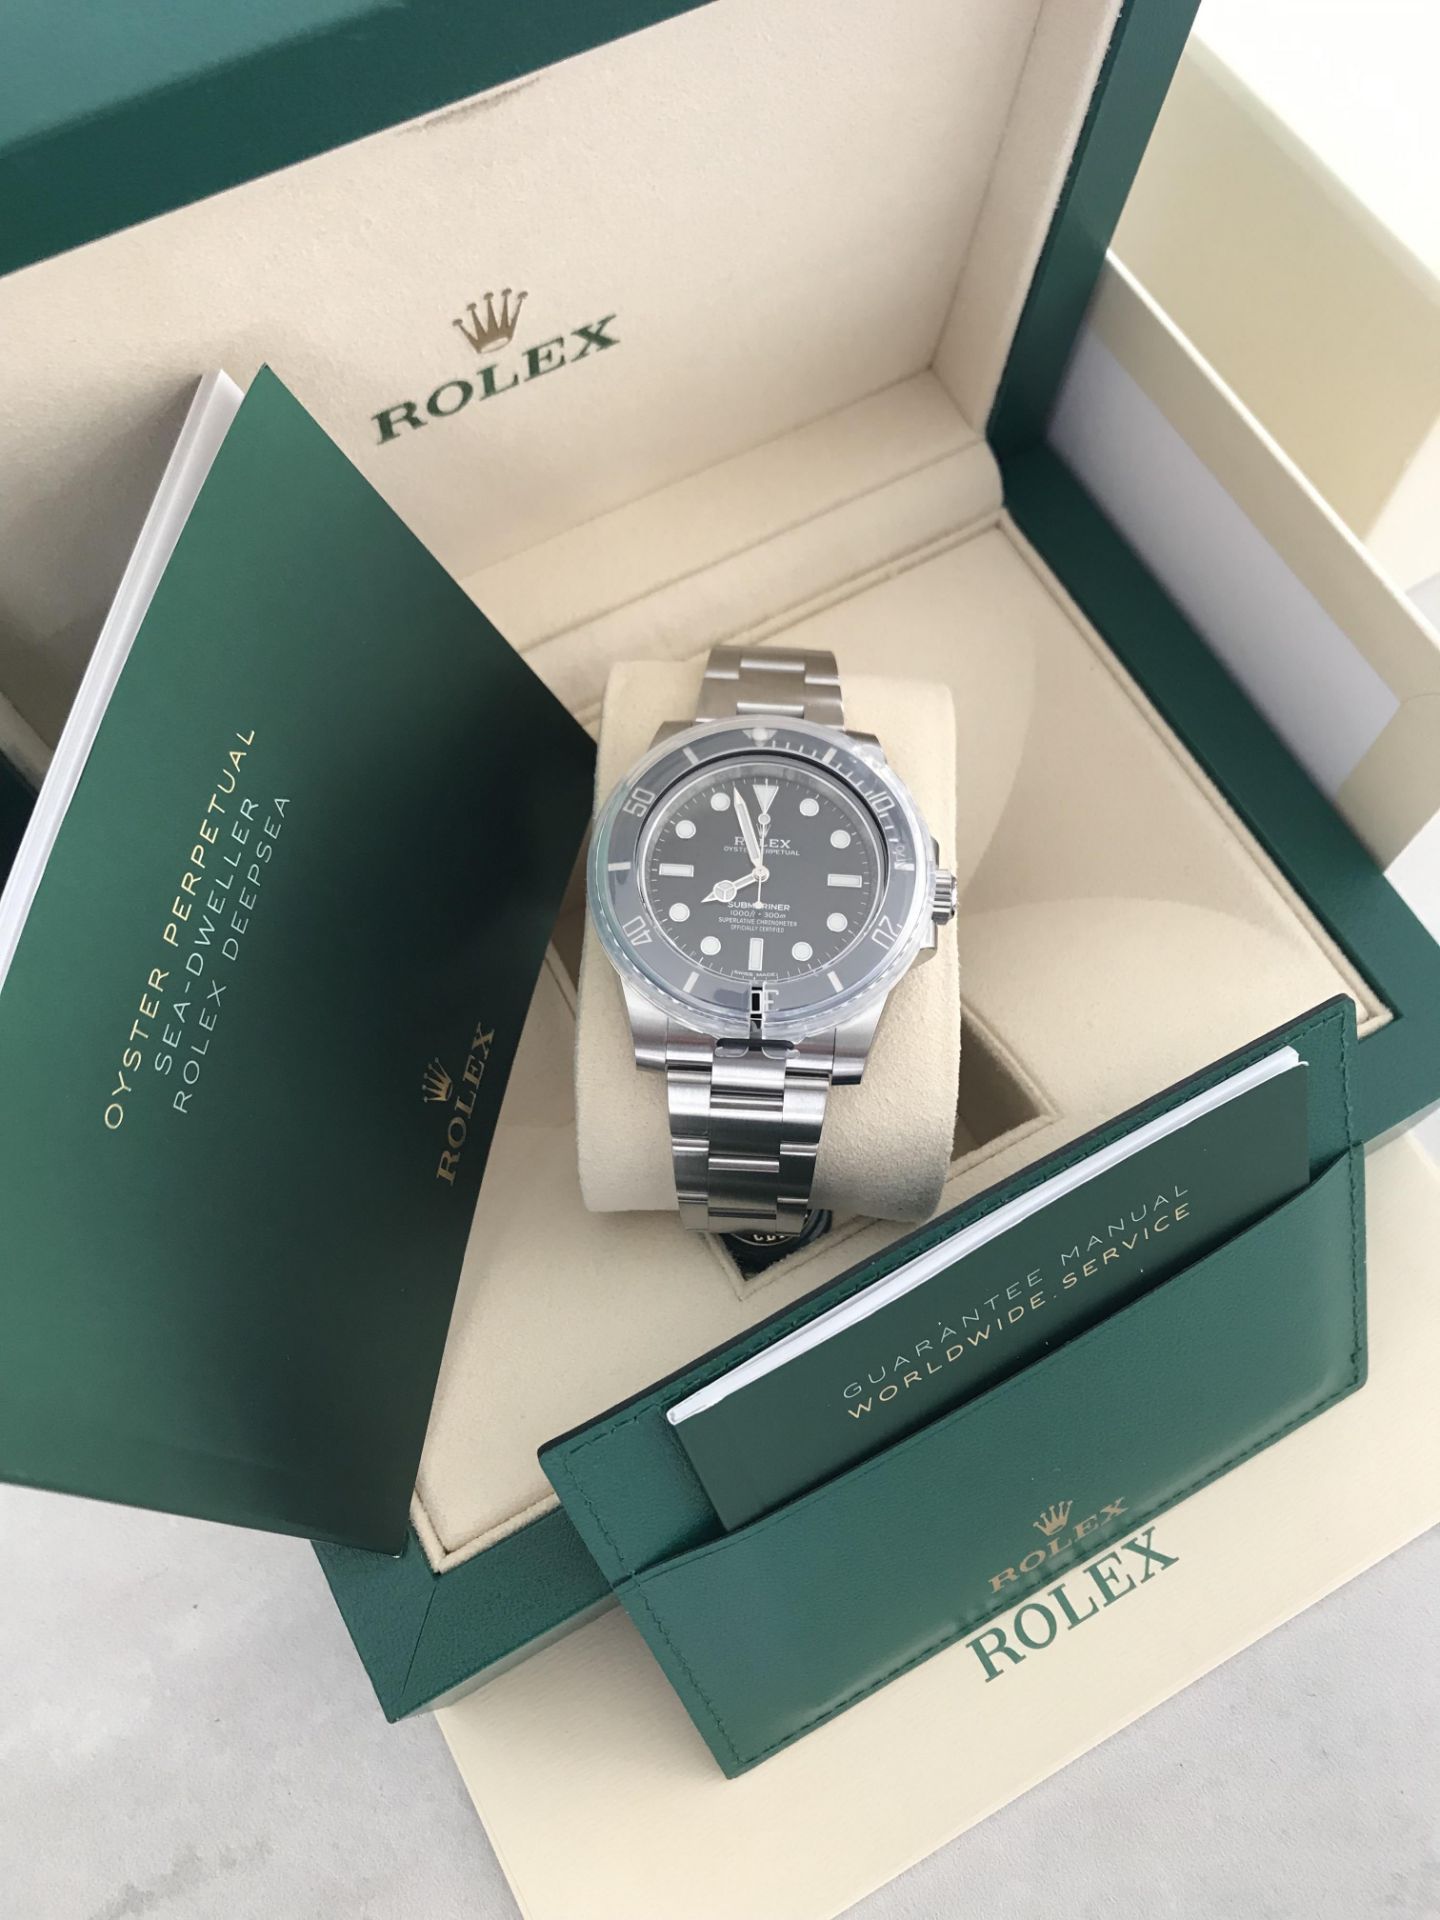 2020 ROLEX SUBMARINER OYSTER STEEL 40 MM WATCH 114060 - Image 5 of 15